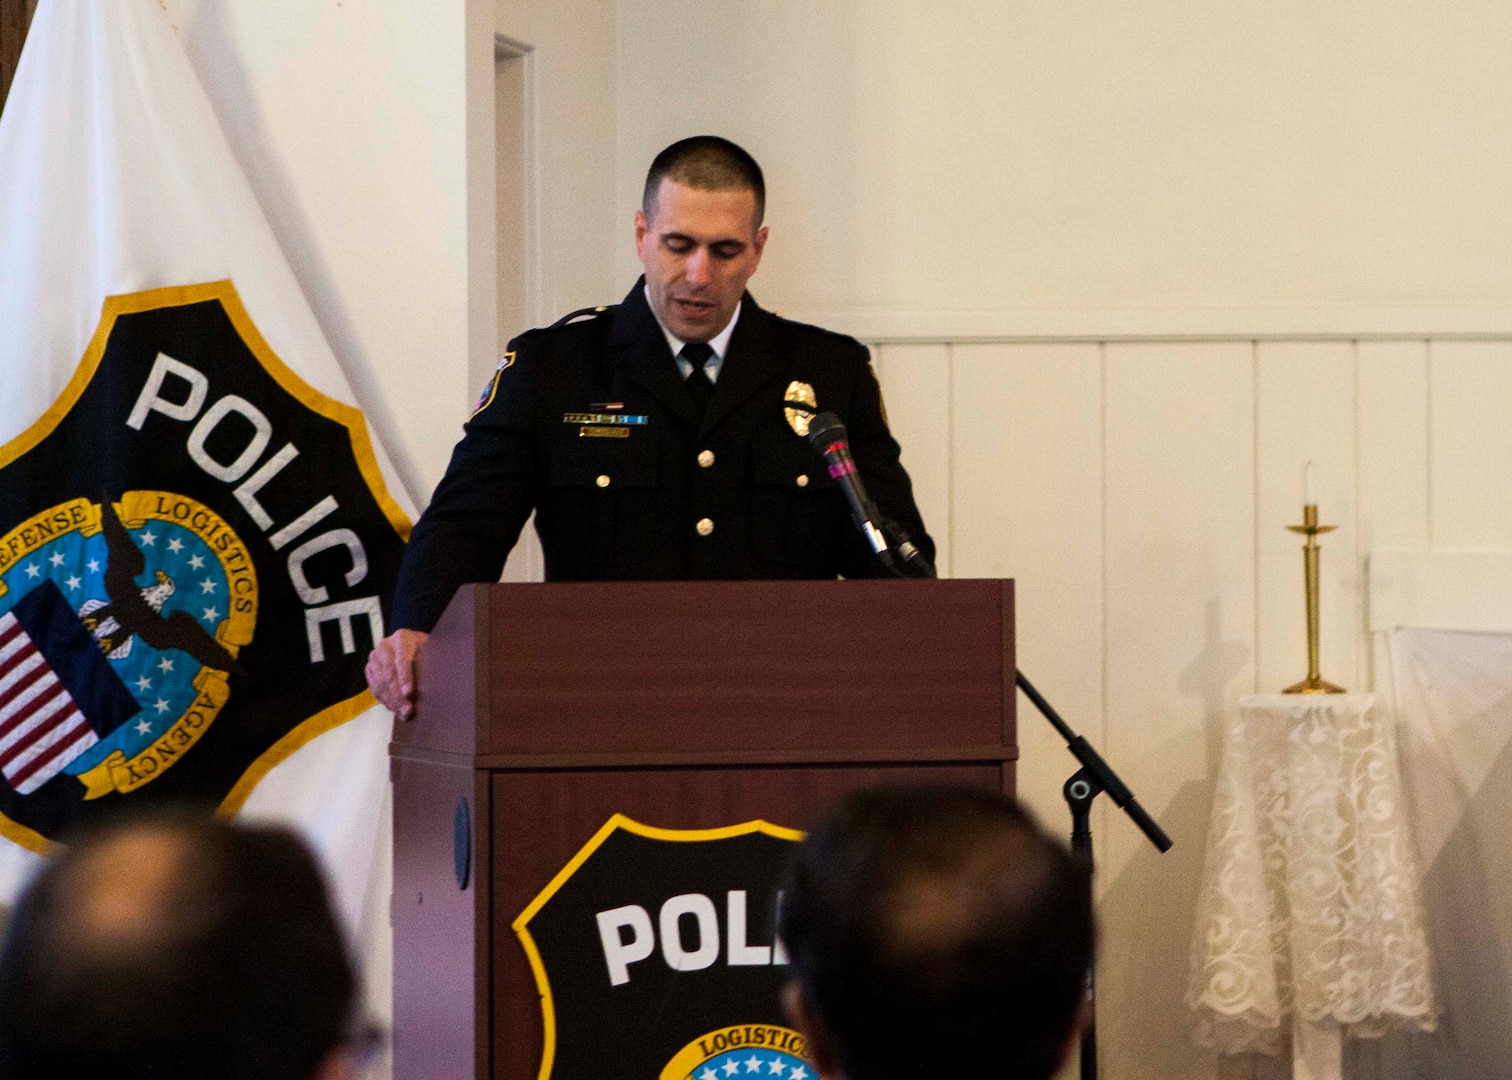 Distribution police chief Douglas Schraeder thanked everyone who gathered to show their respect for the men and women who have died in the line of duty nationwide at the National Police Week wreath laying ceremony on May 18.